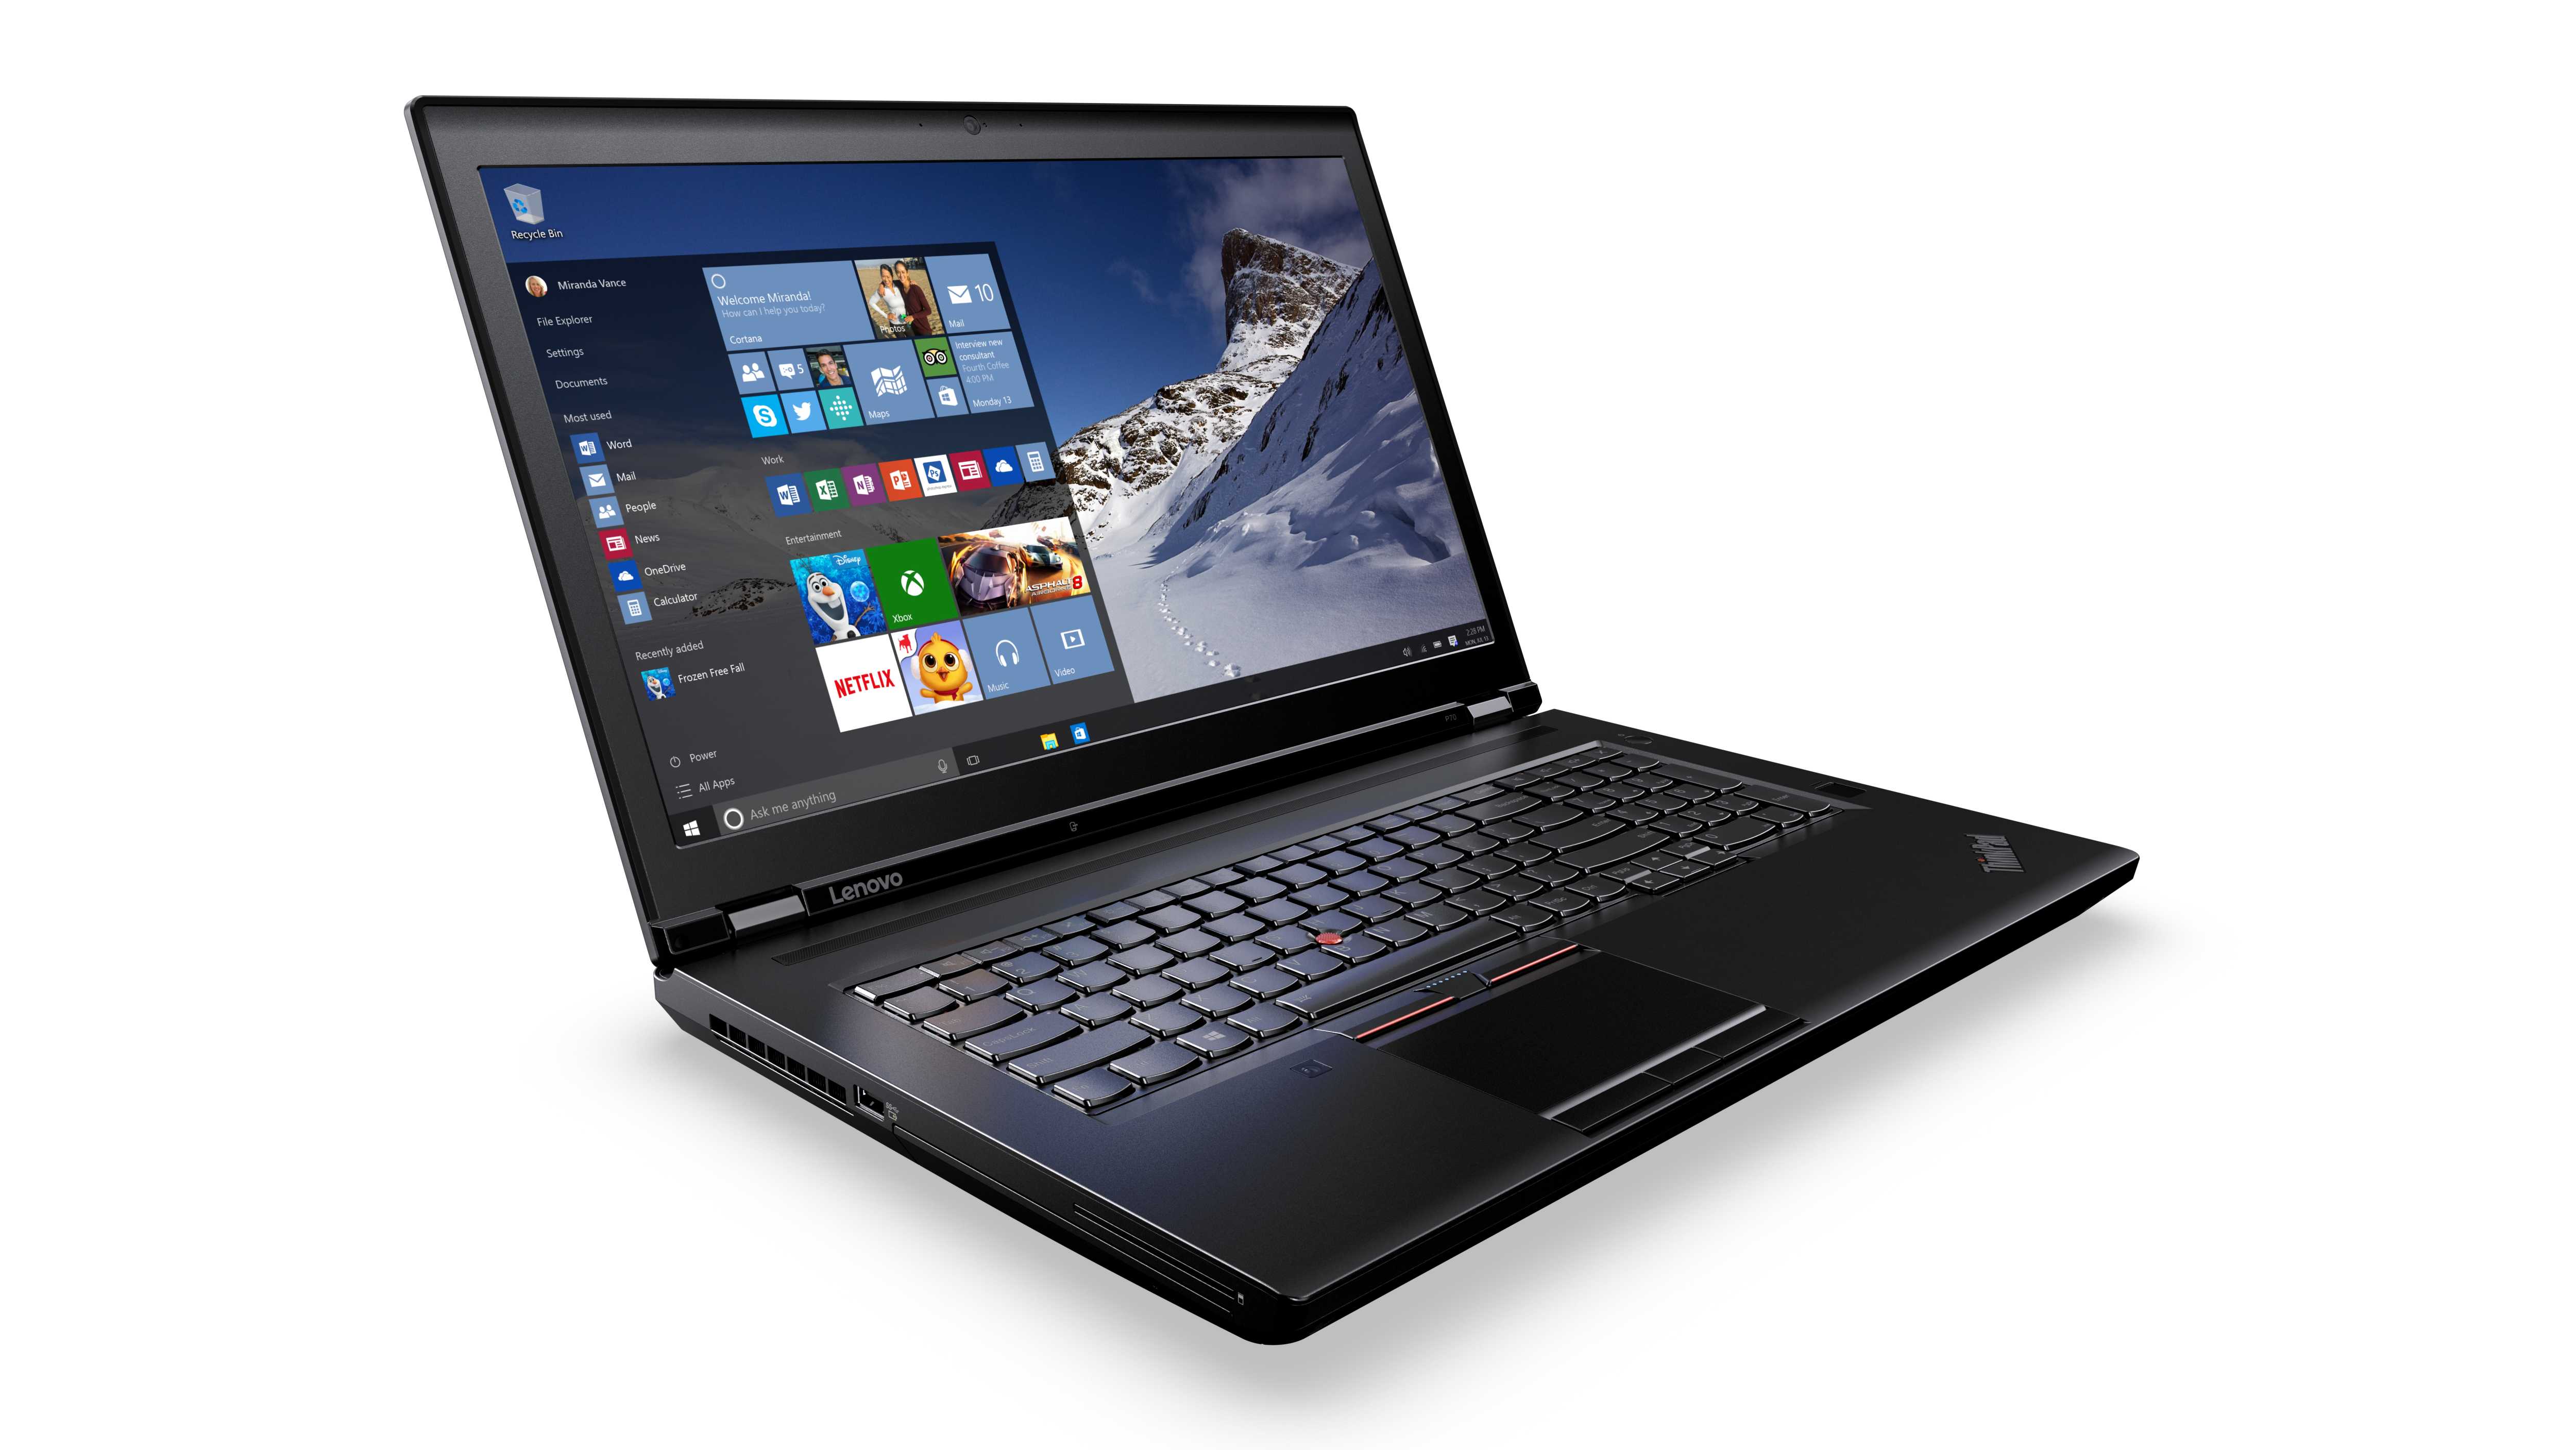  Lenovo  announces powerhouse laptops  powered by new mobile 